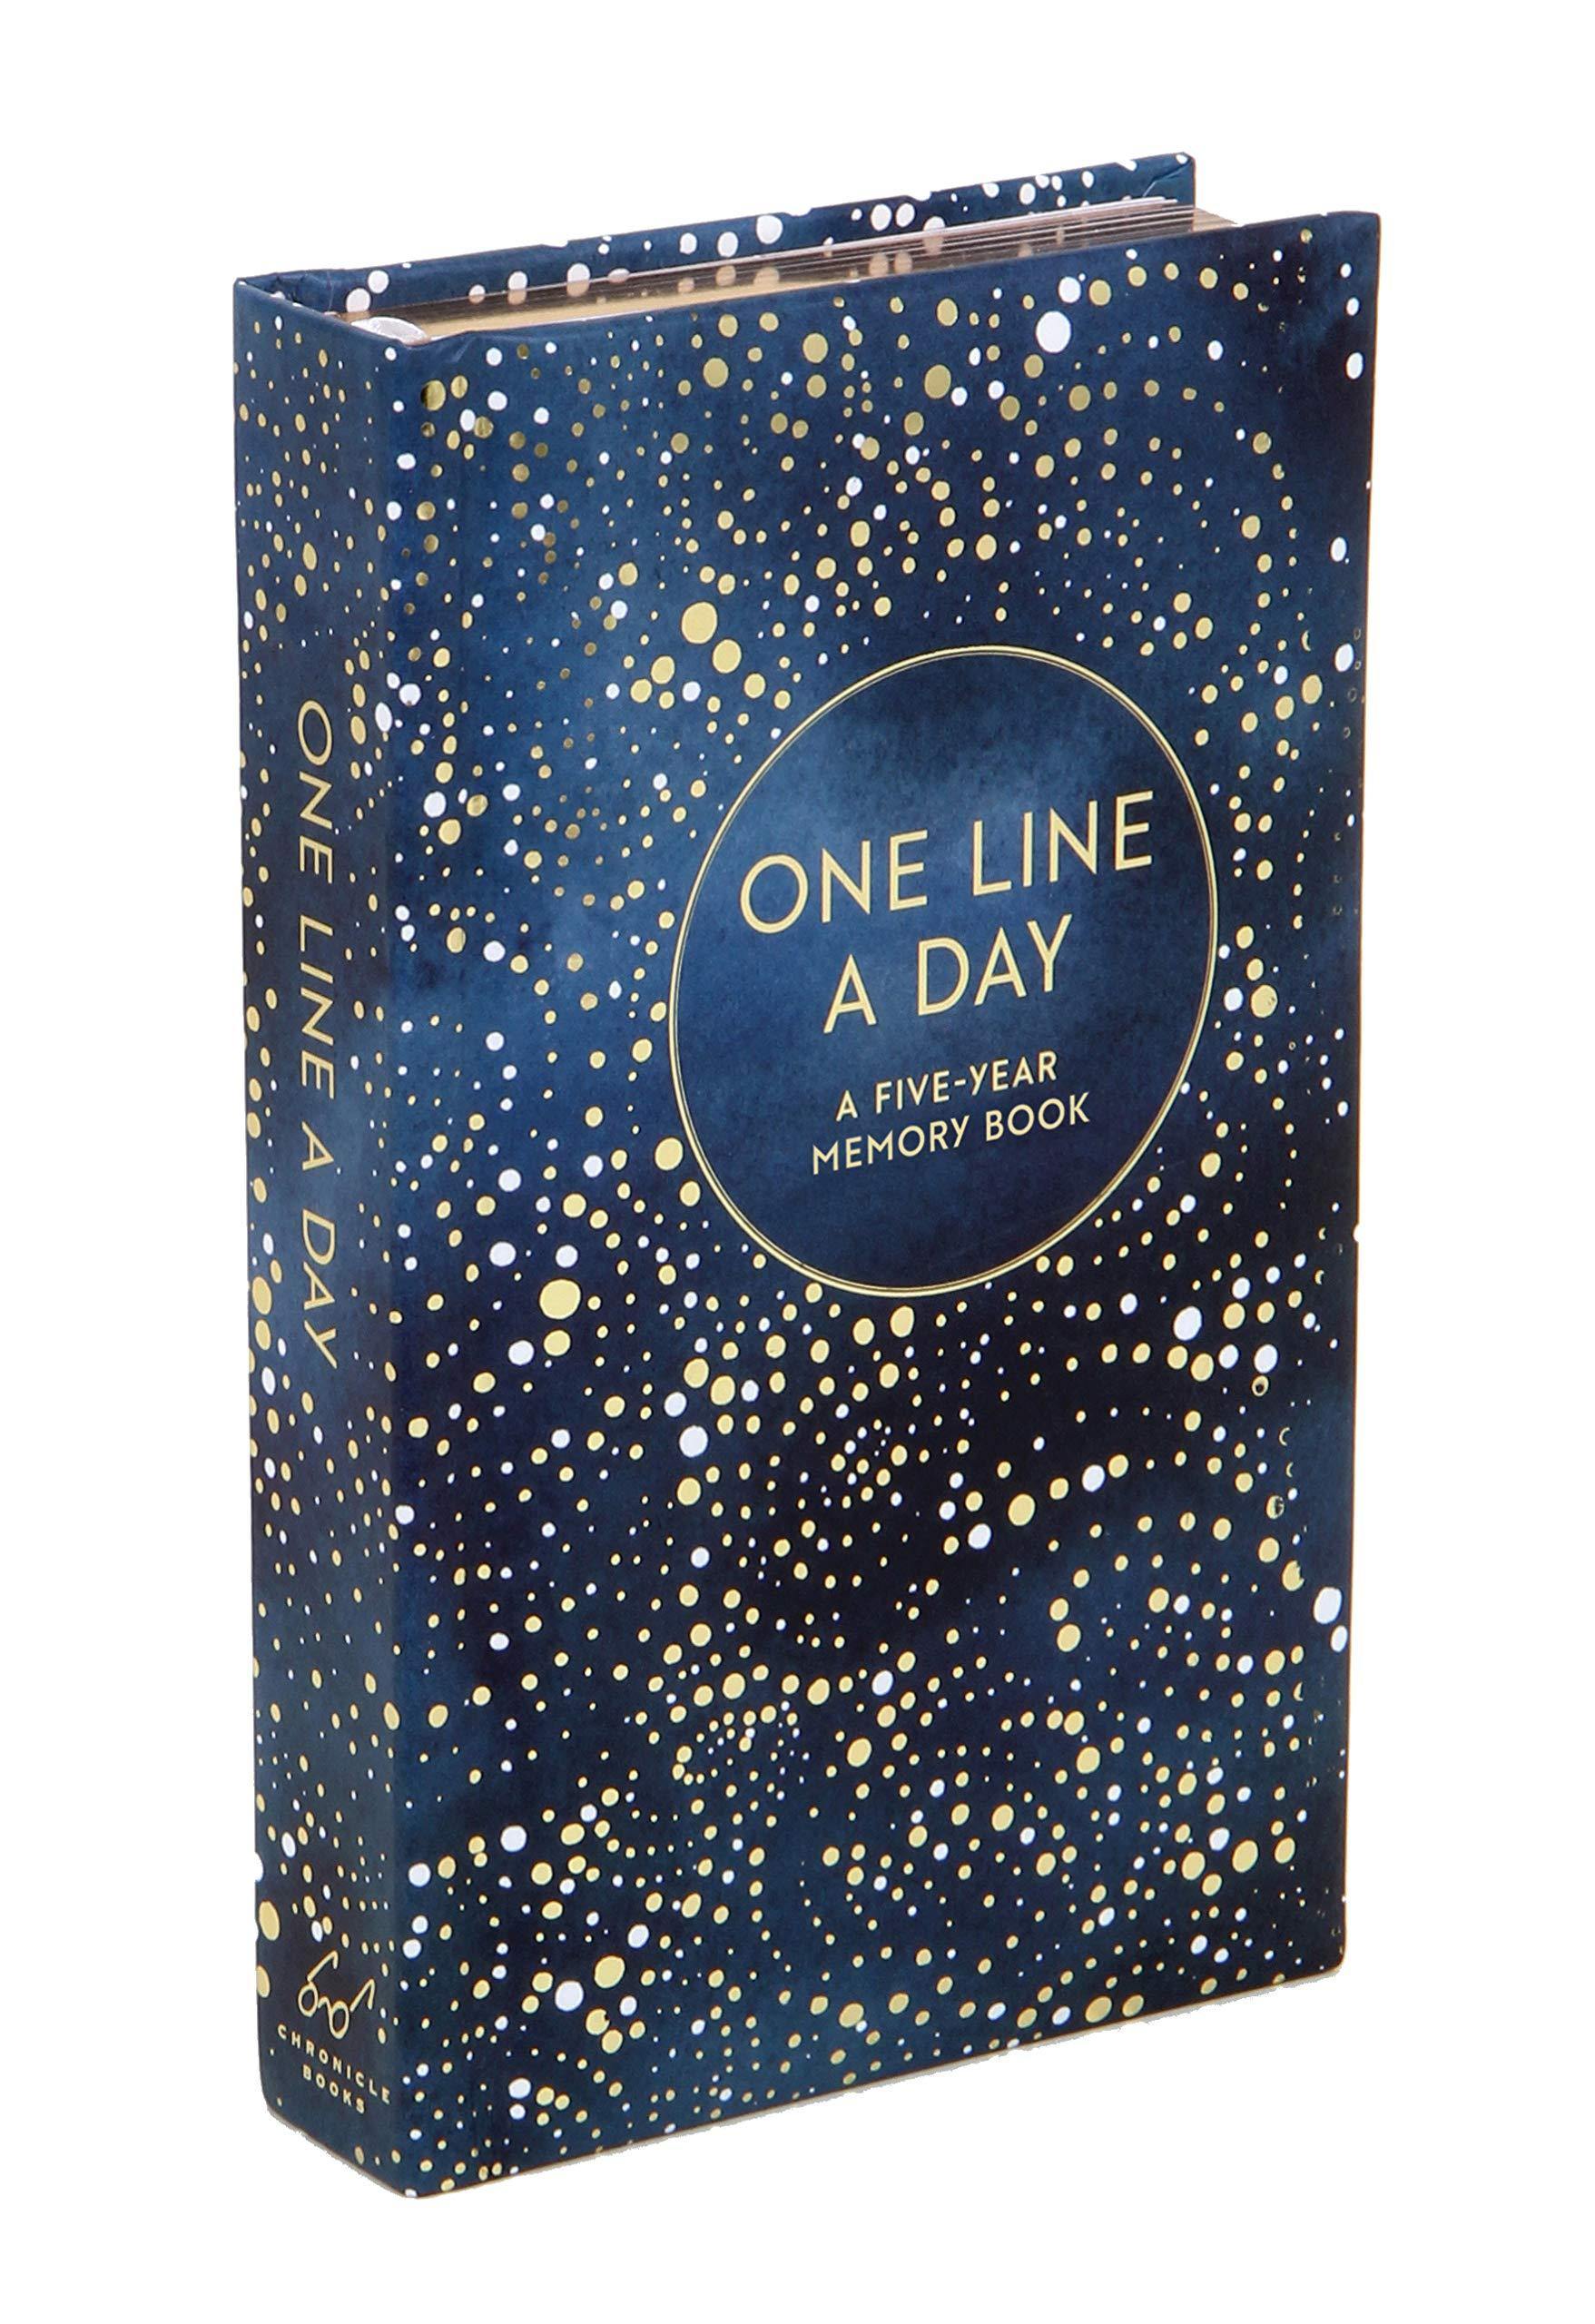 One Line a Day Celestial Journal - Penny Black